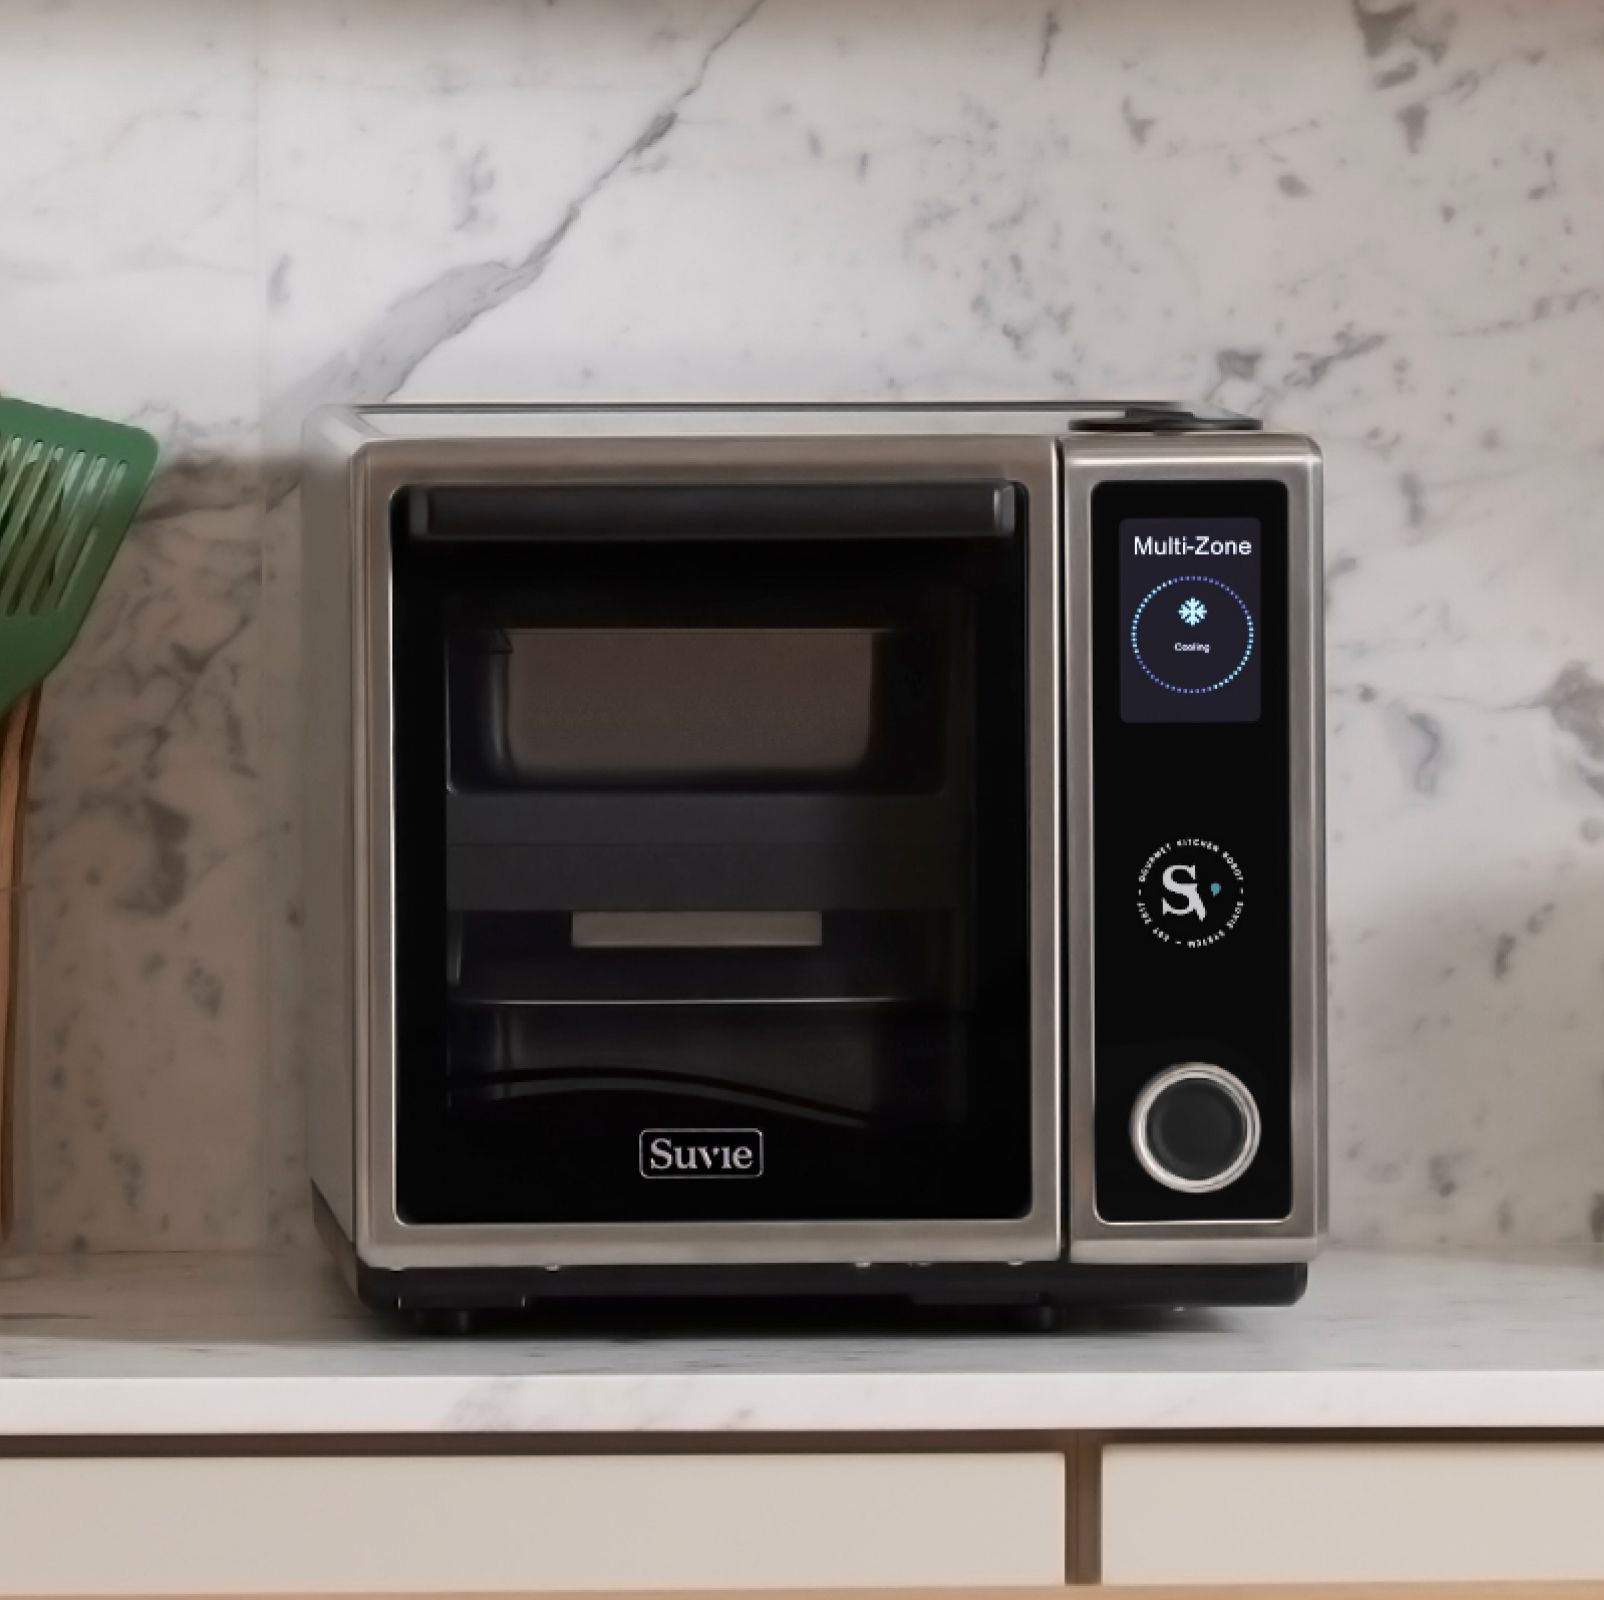 Suvie Kitchen Robot: Wi-Fi countertop oven refrigerates, cooks food - CNET